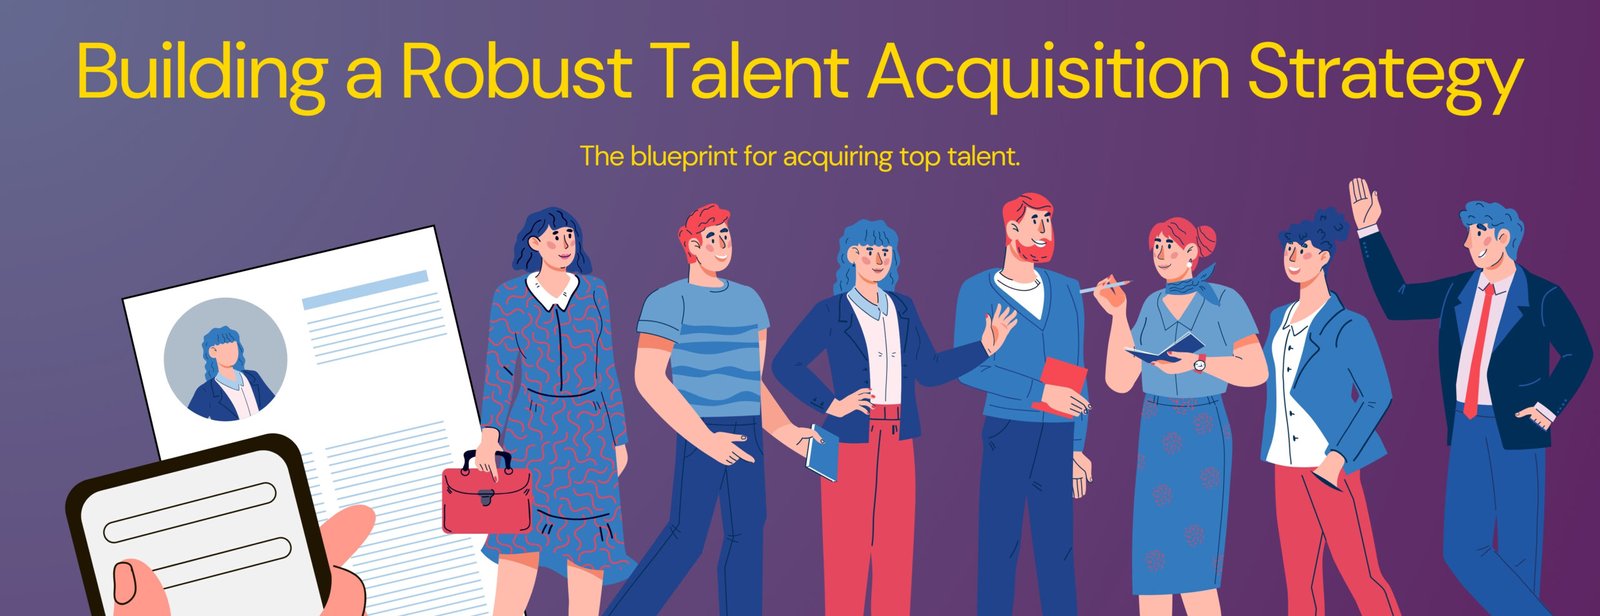 The Blueprint for Building a Robust Talent Acquisition Strategy